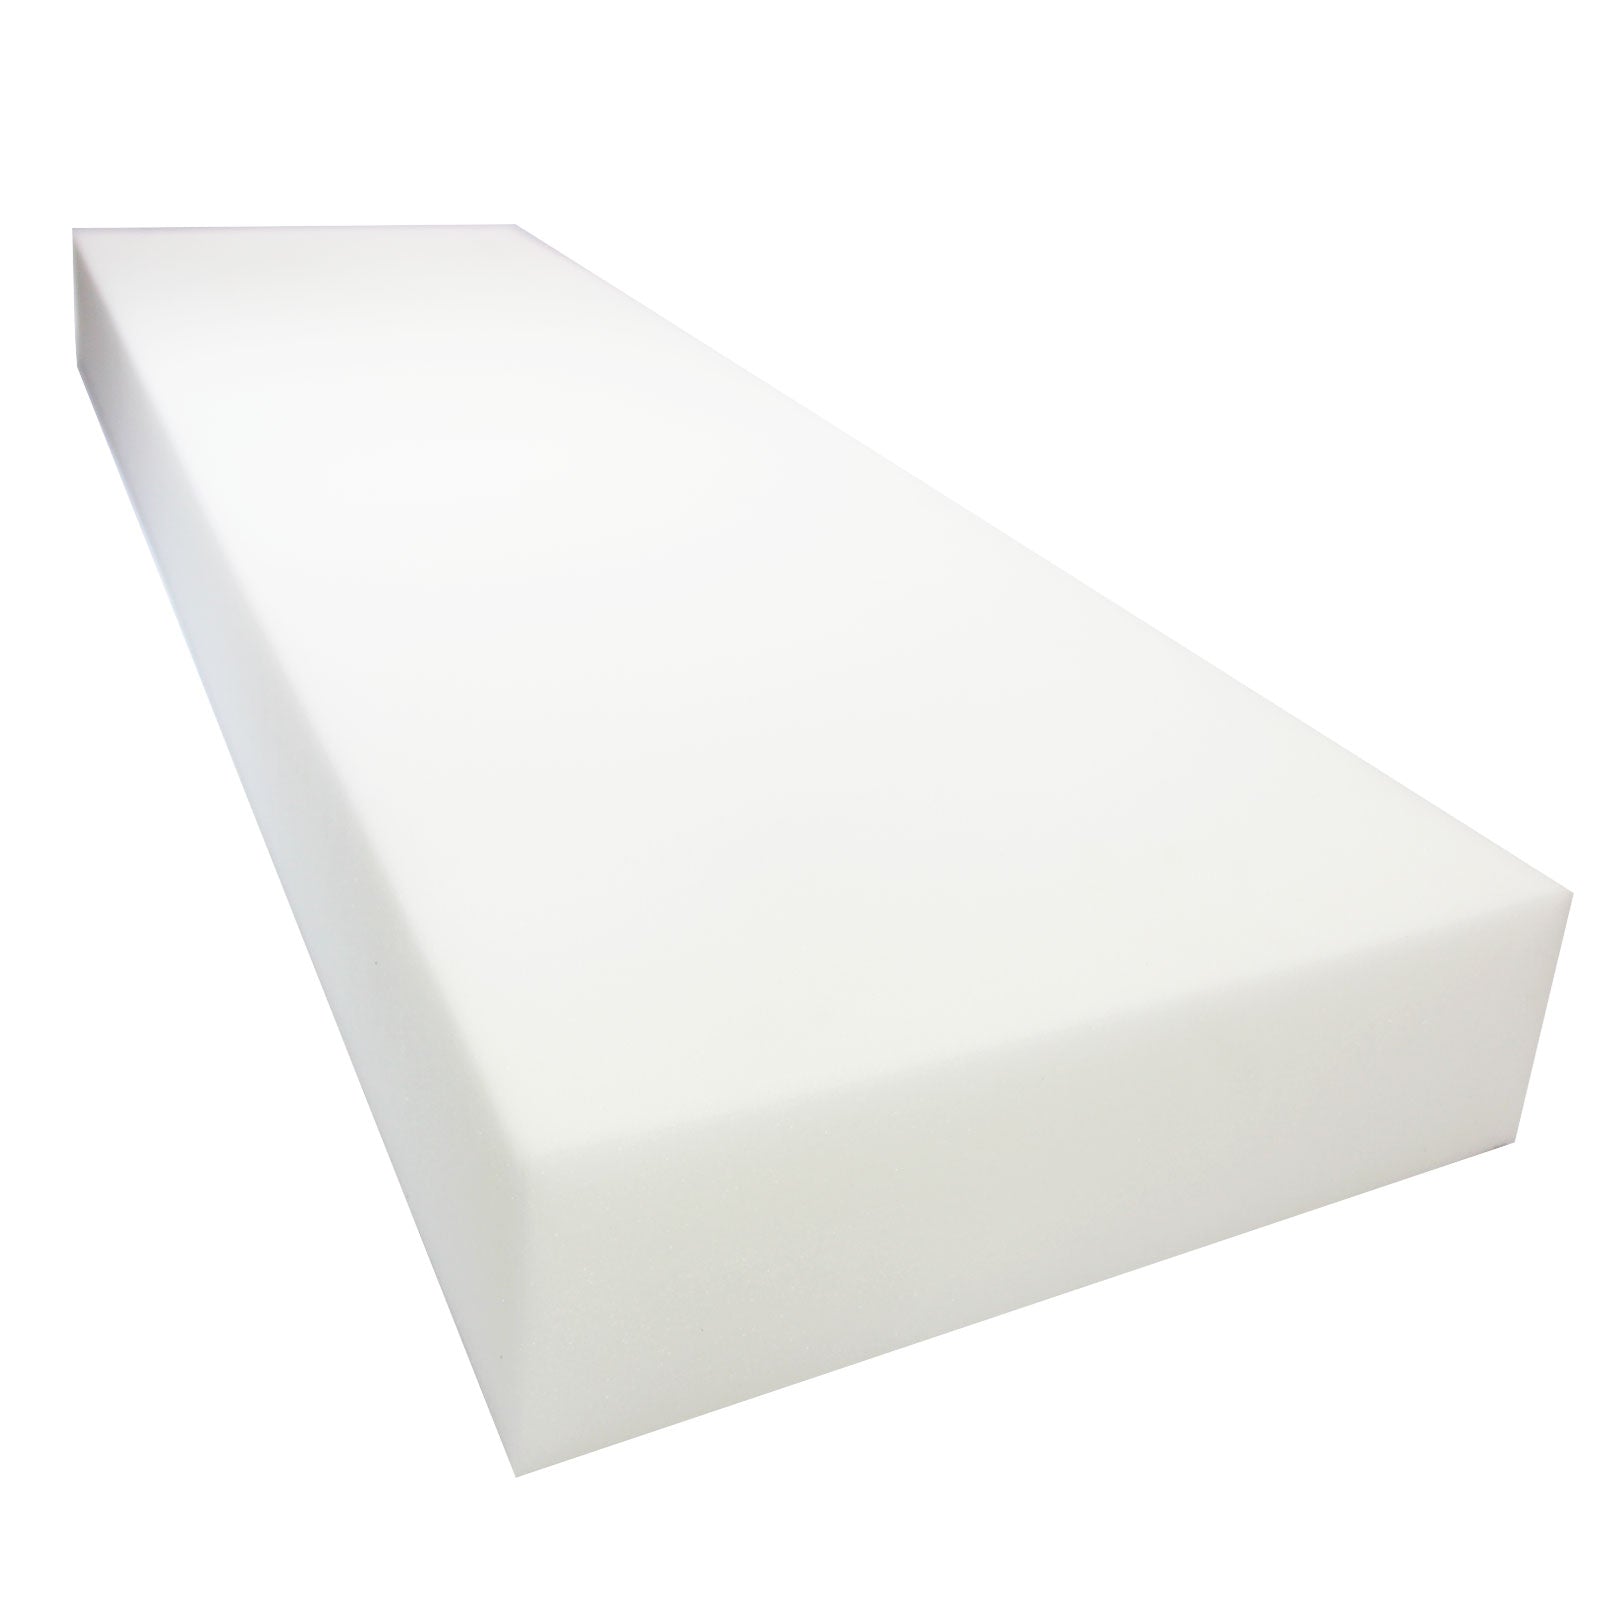 Foamy Foam High Density 6 inch Thick, 24 inch Wide, 72 inch Long Upholstery  Foam, Cushion Replacement